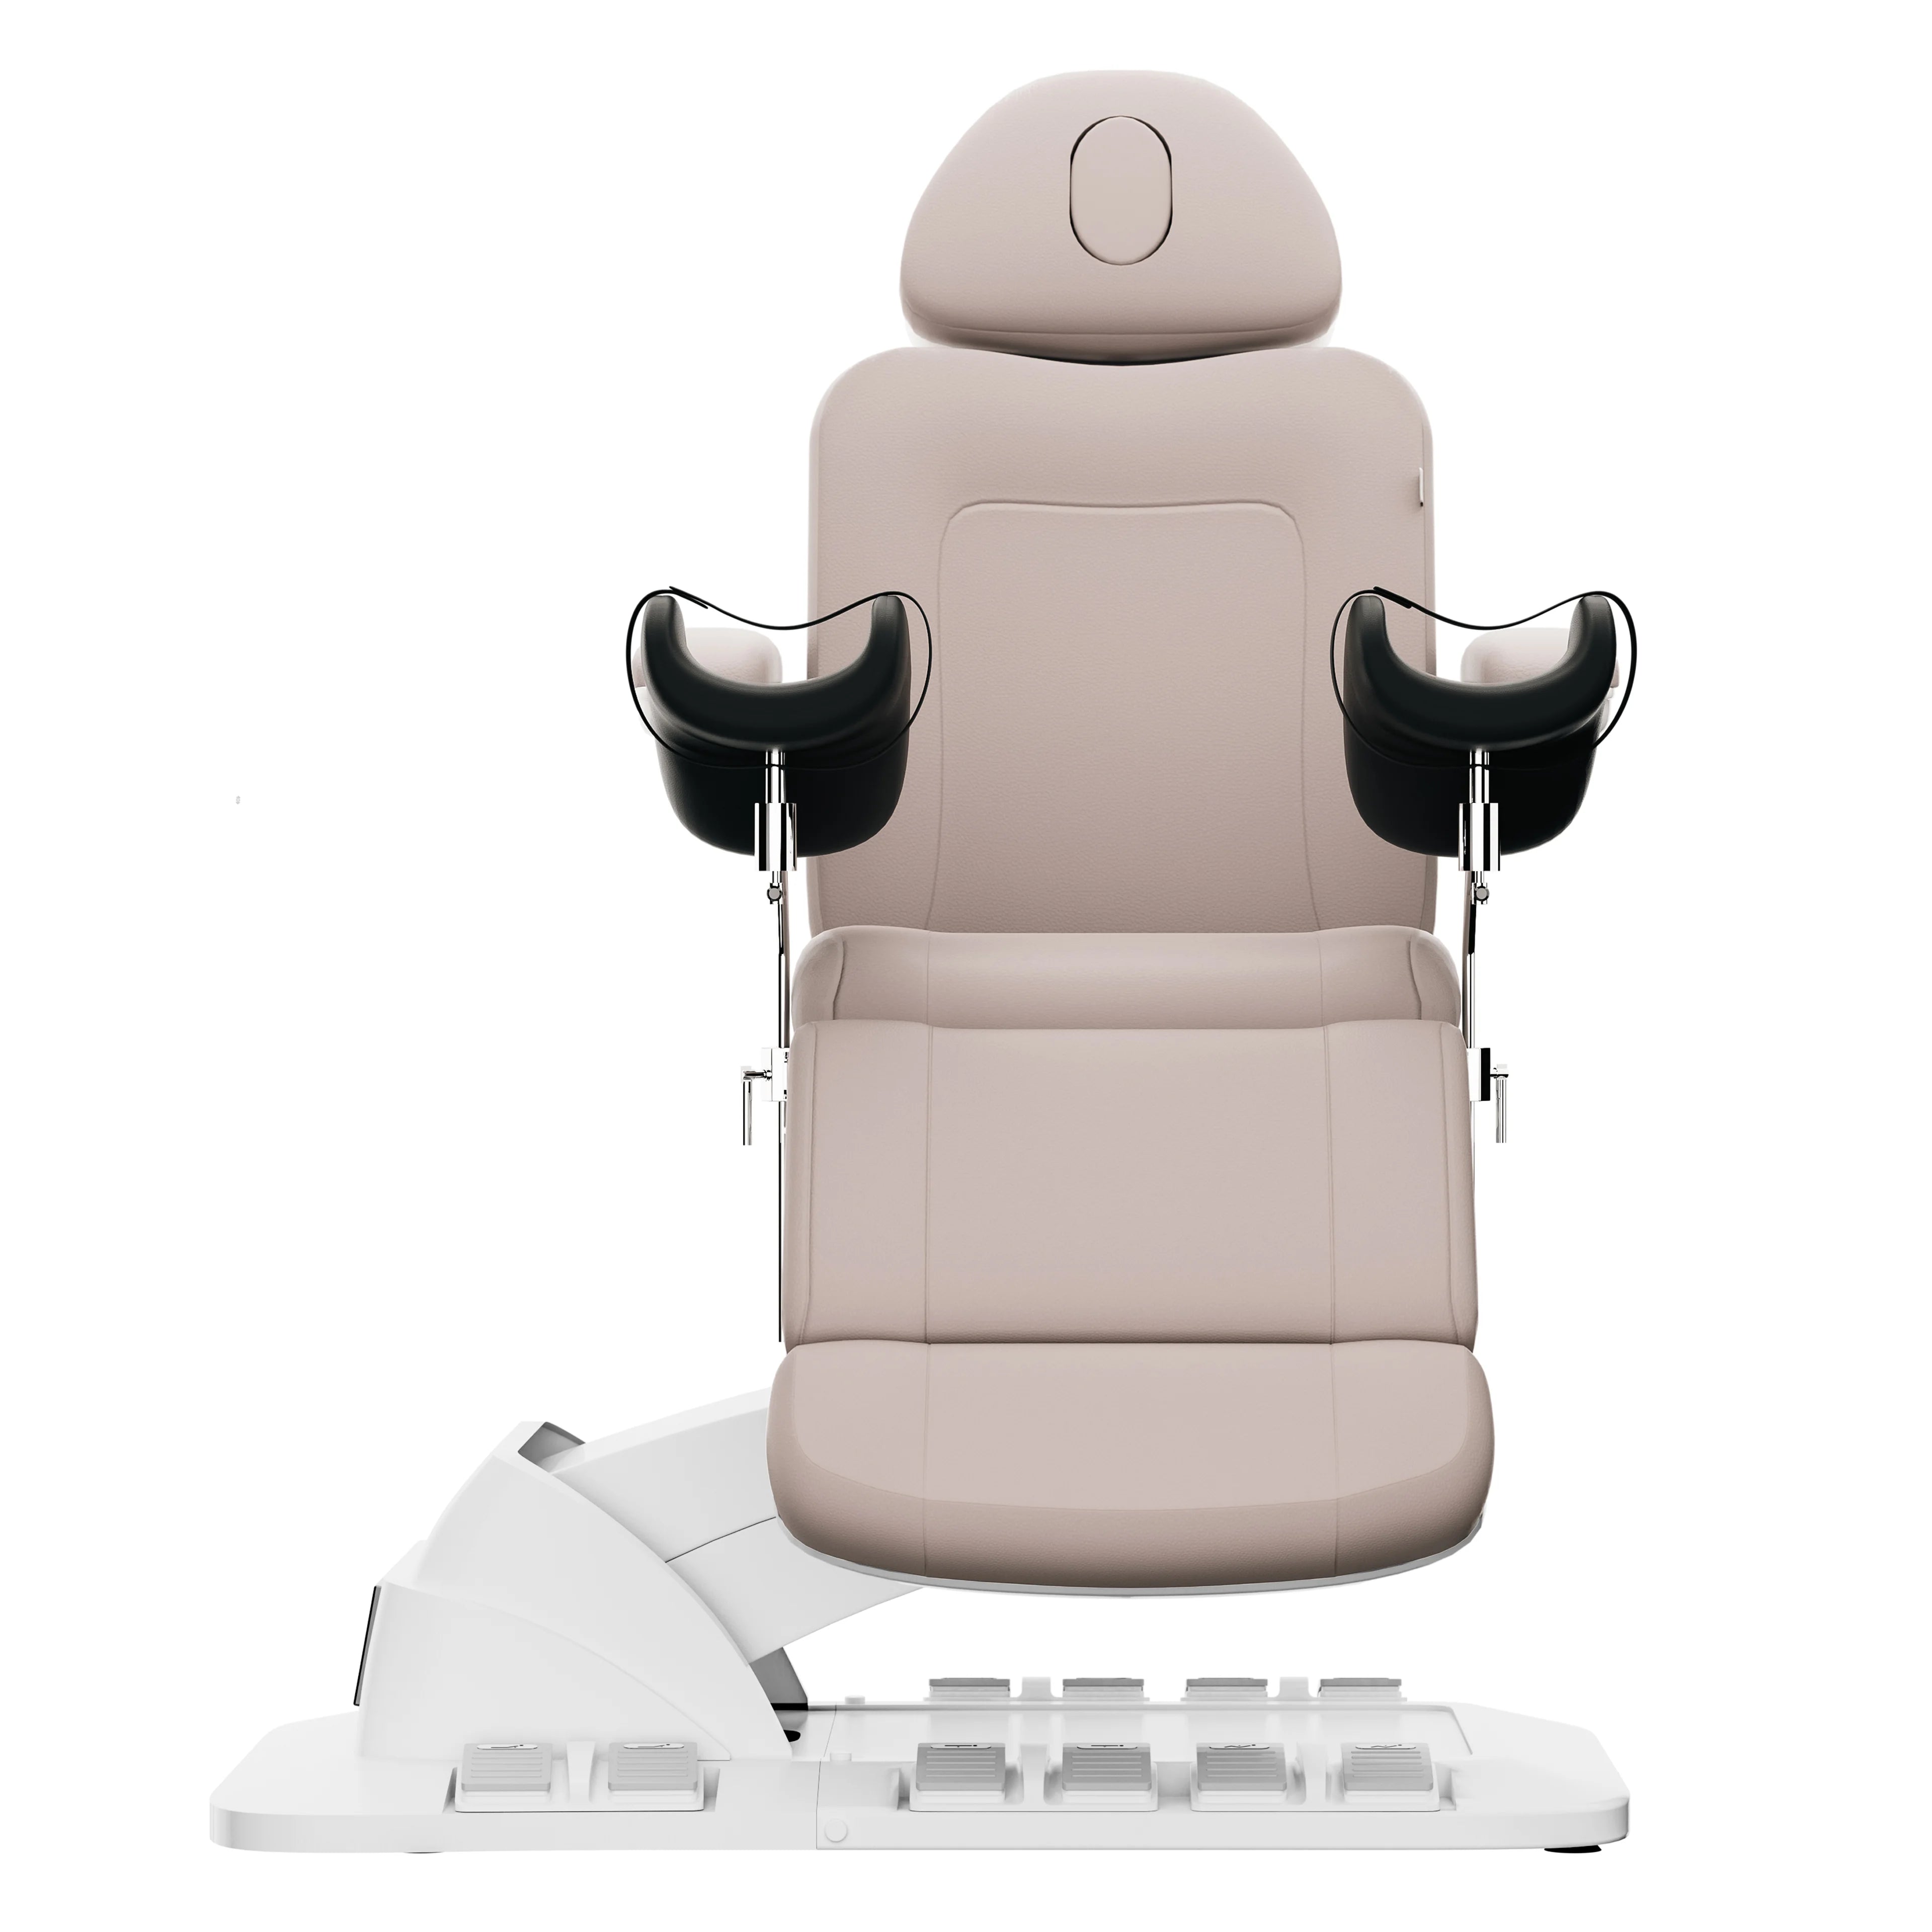 SPAMARC . Novato (Taupe) . OBGYN & GYNECOLOGY . STIRRUPS . ROTATING . 4 MOTOR SPA TREATMENT CHAIR/BED